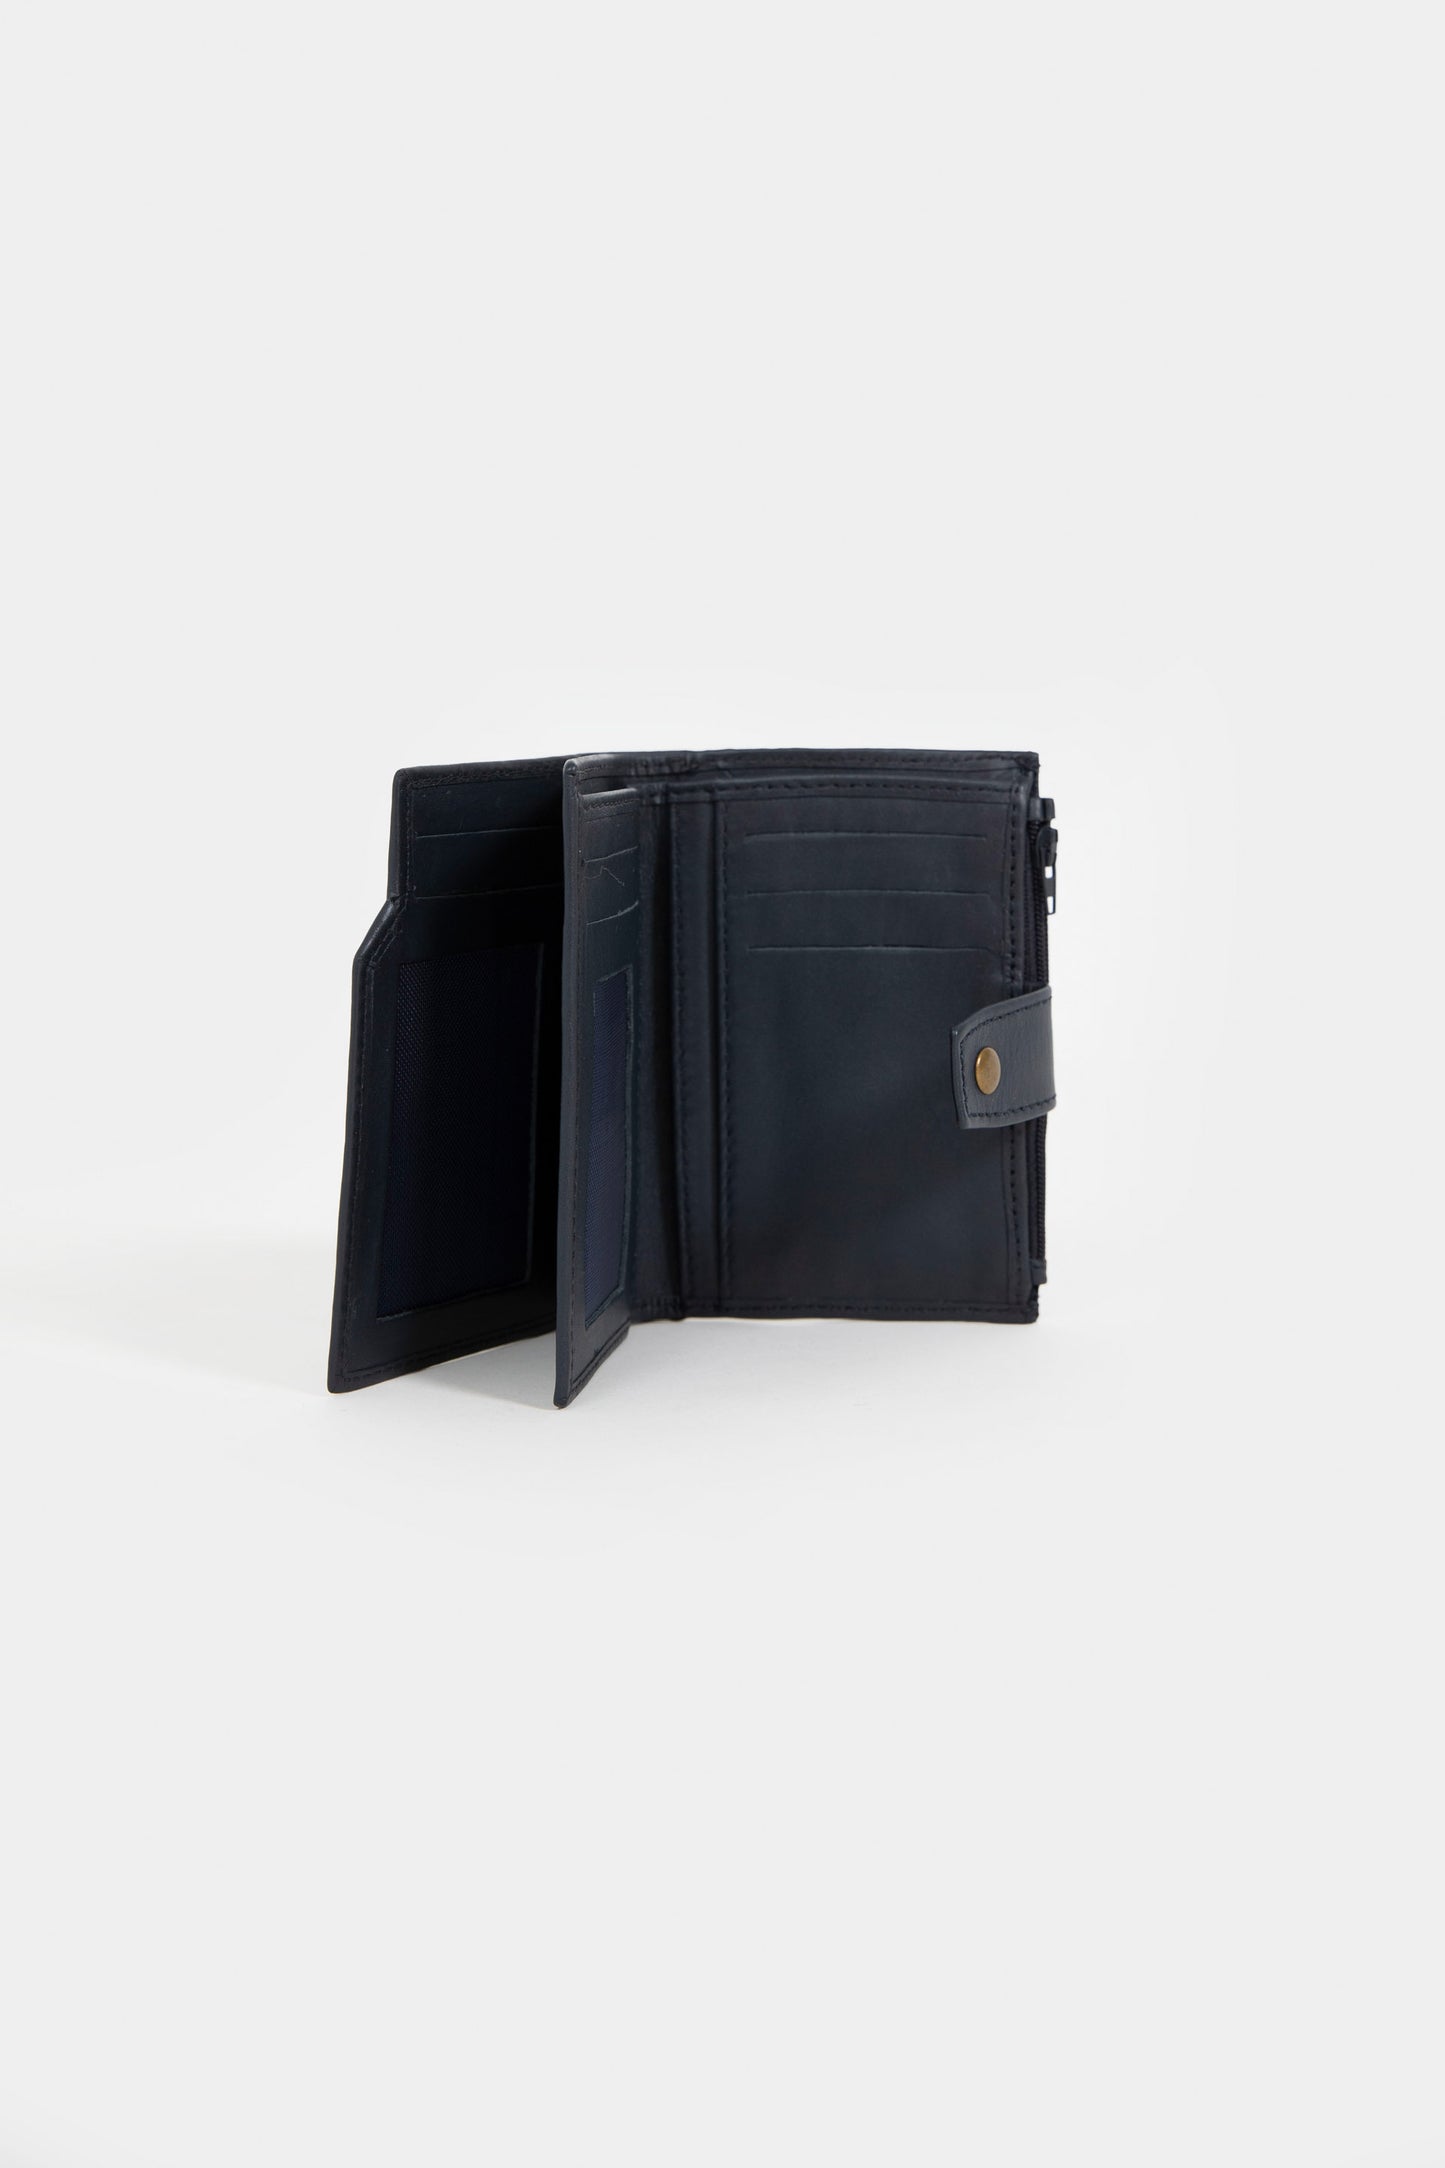 tri-fold leather long wallet